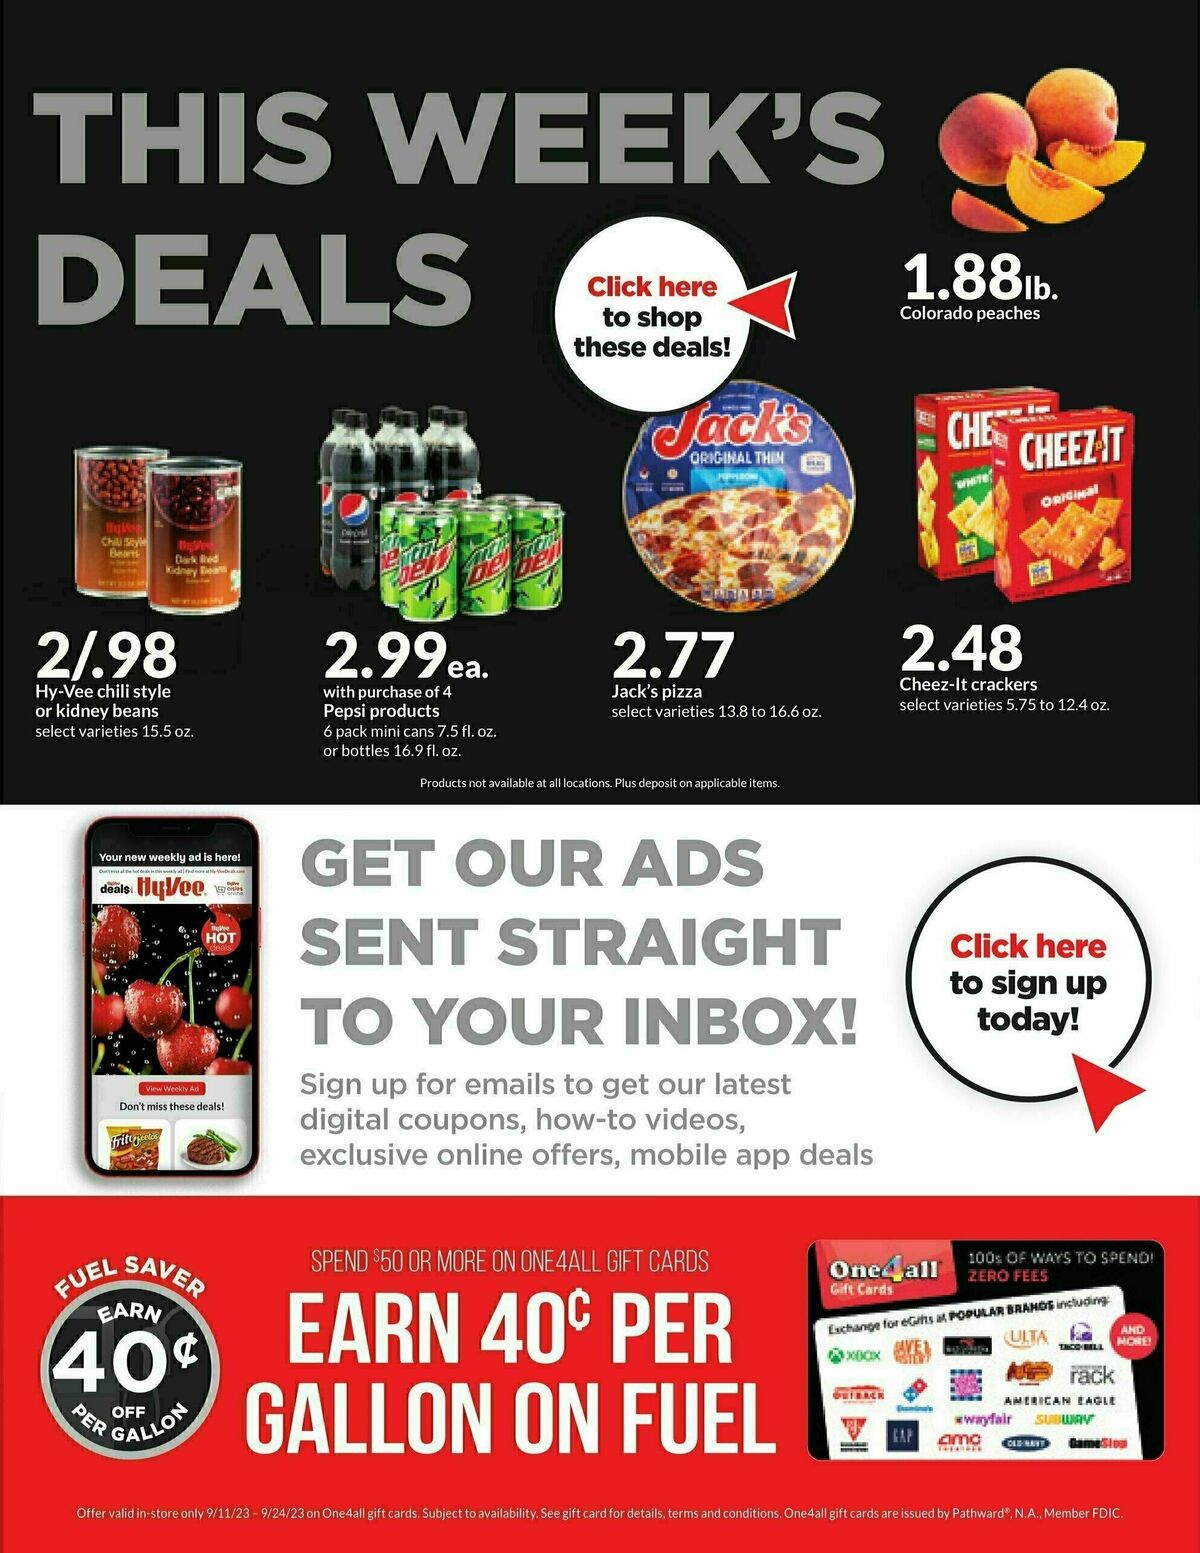 Hy-Vee Weekly Ad from September 18